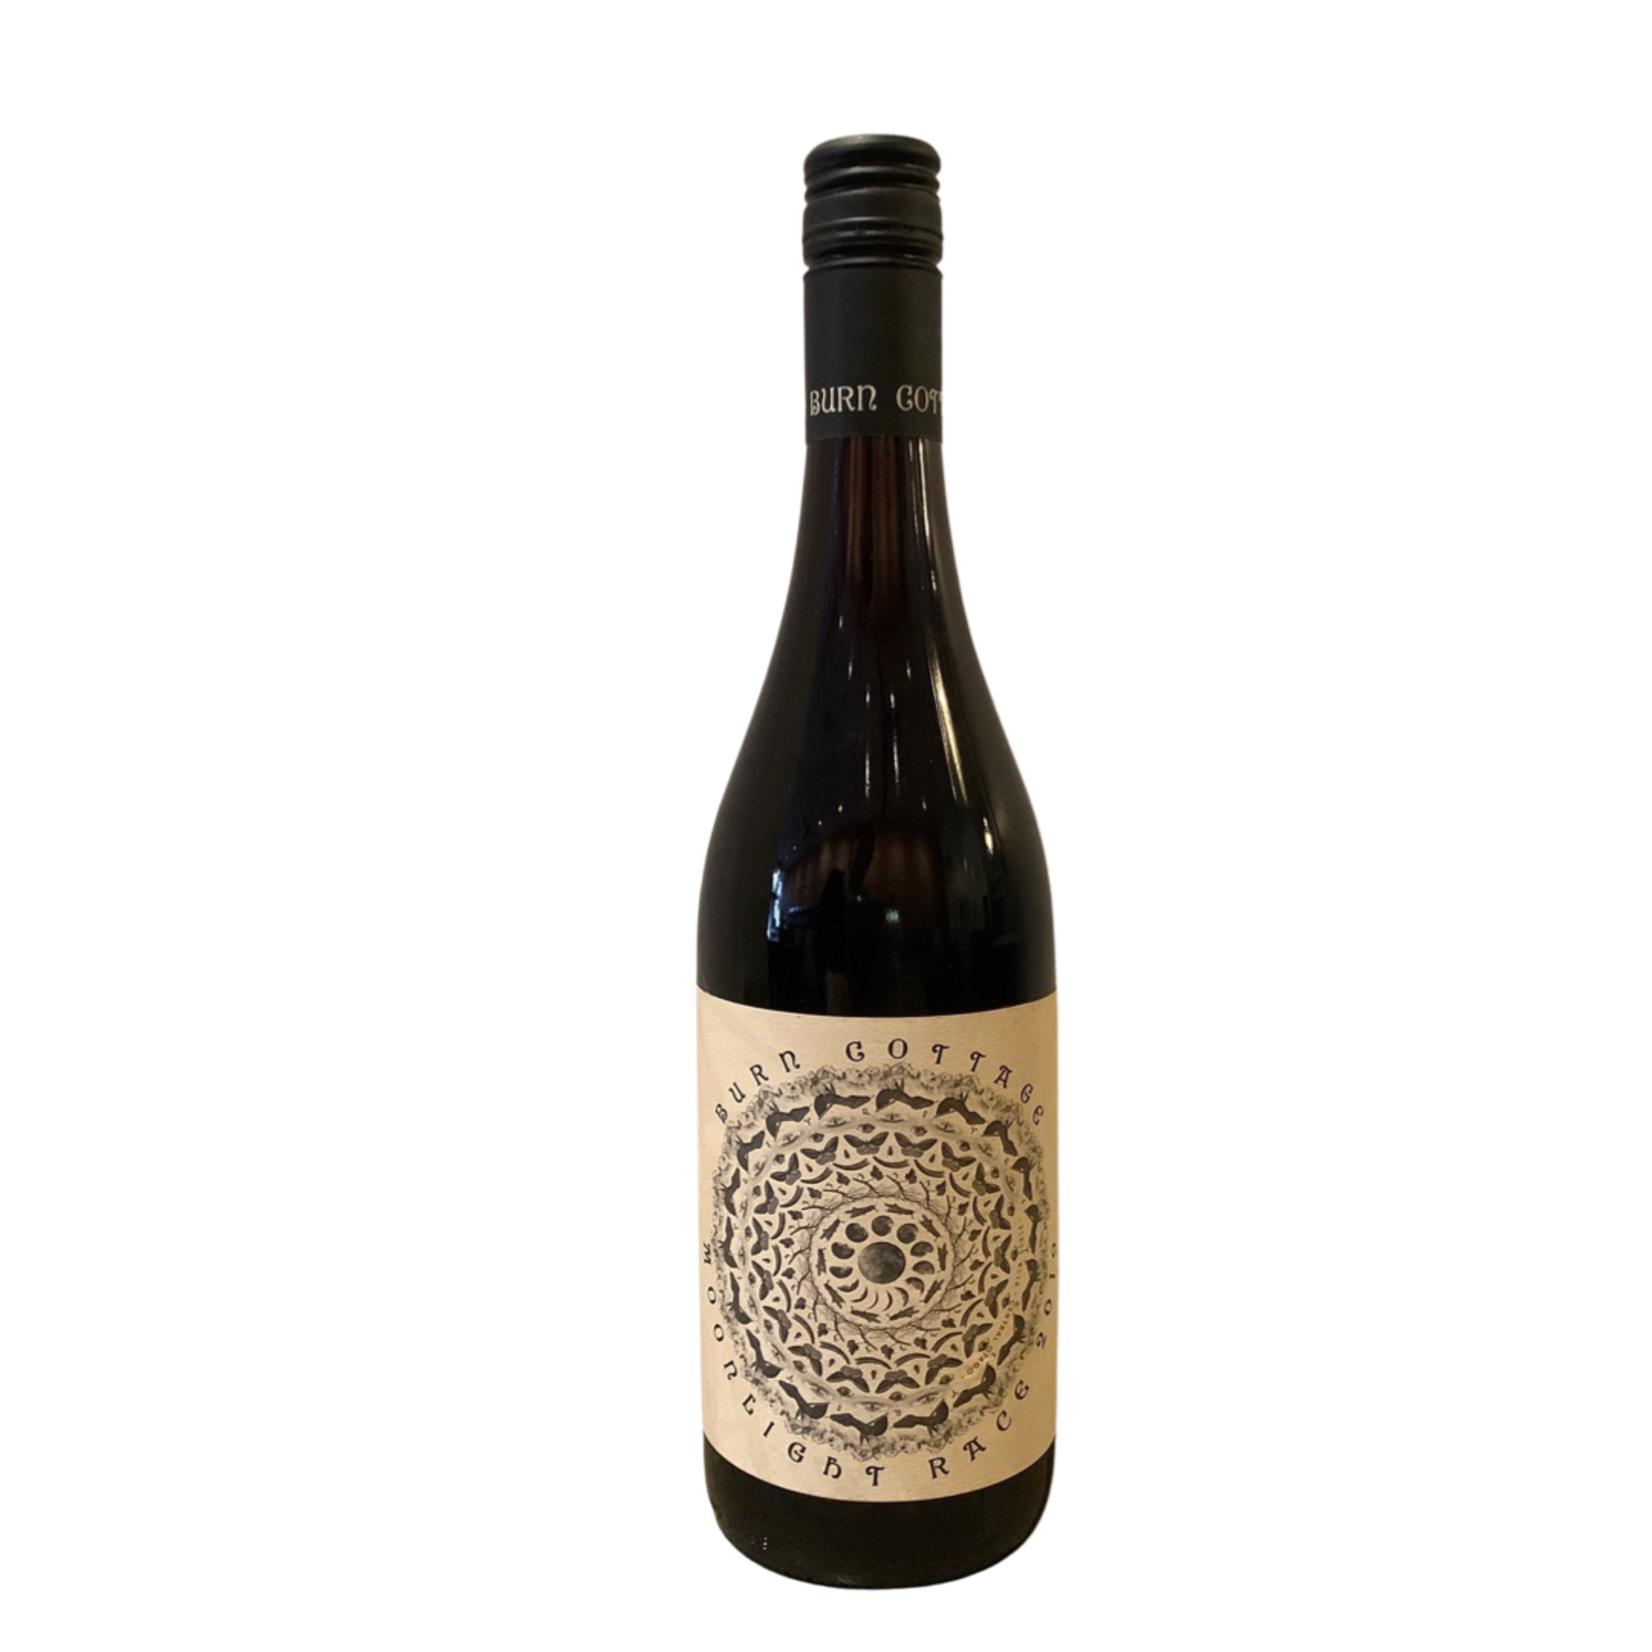 2019 Sauvage Family Burn Cottage "Moonlight Race" Pinot Noir, Central Otago | New Zealand